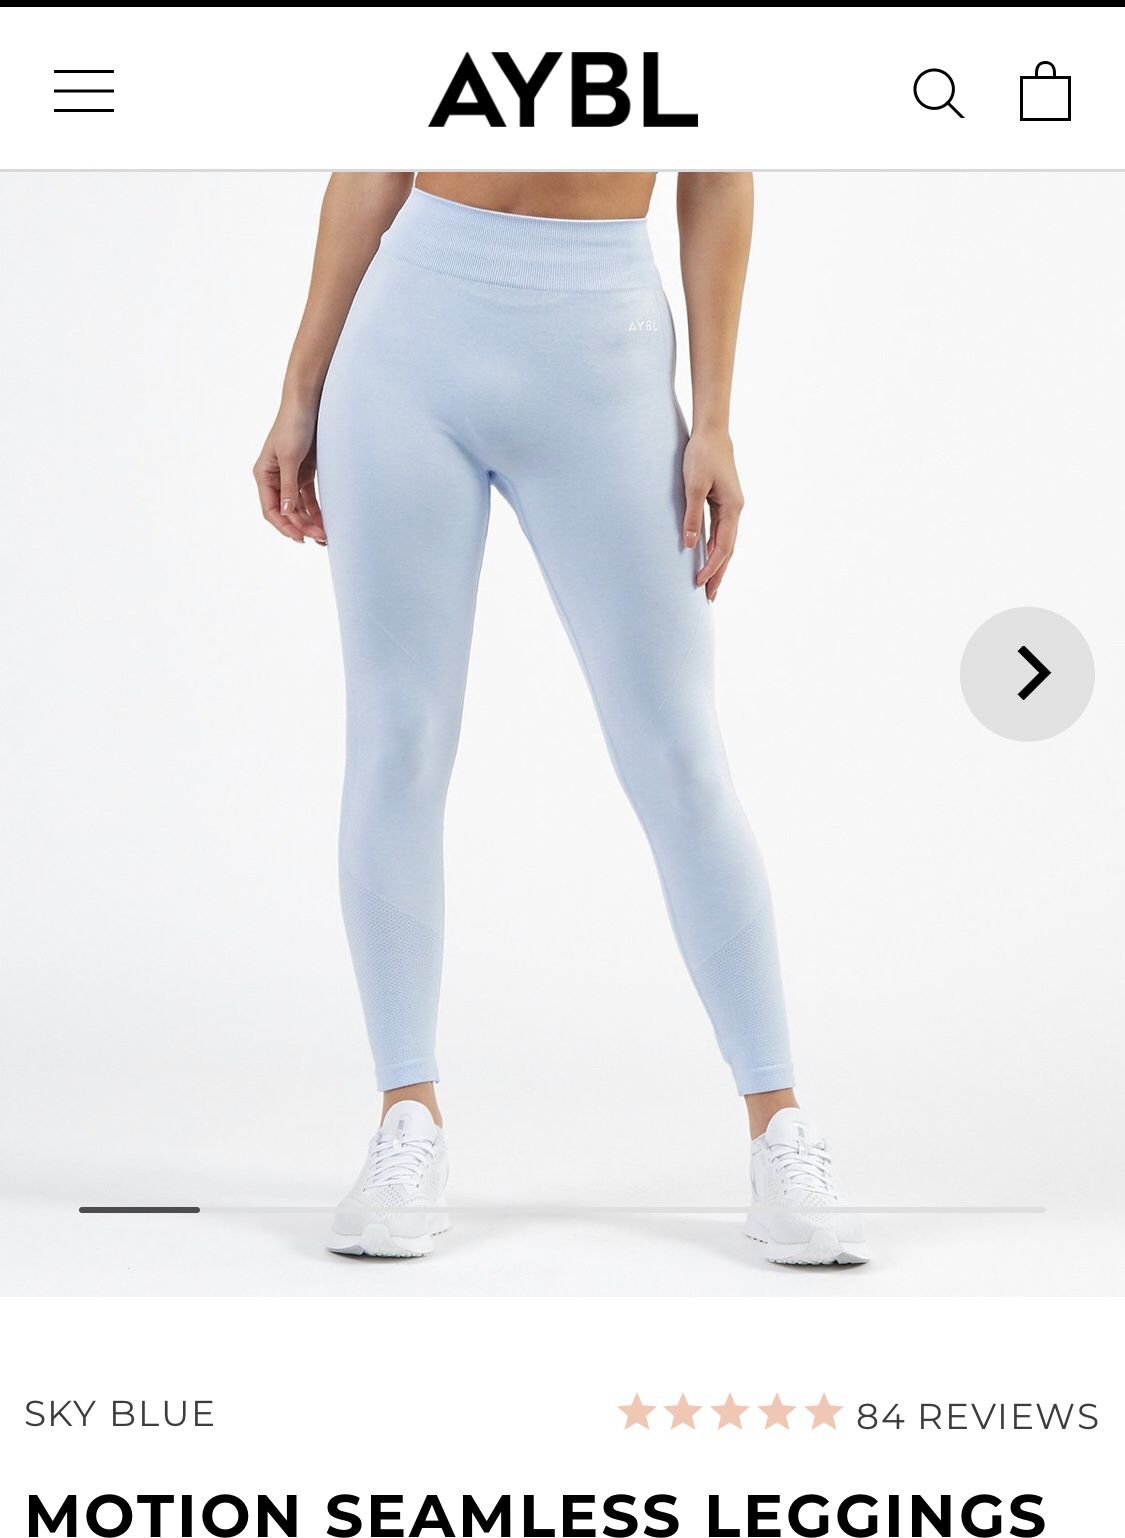 AYBL motion seamless leggings for Sale in Los Angeles, CA - OfferUp